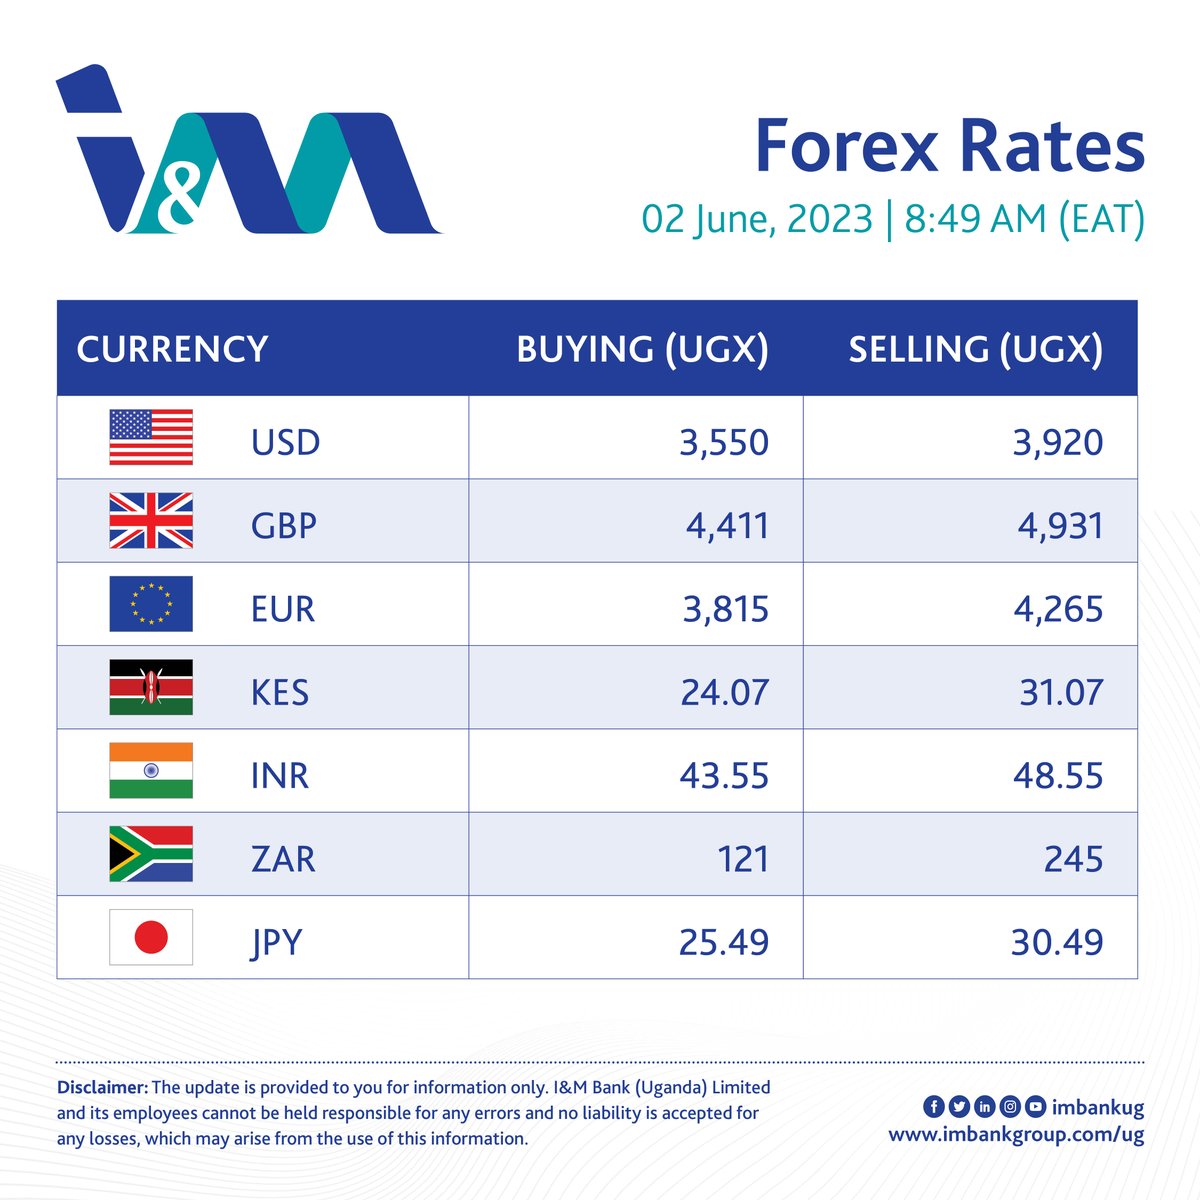 Our competitive rates will keep you ahead in the forex trading world! You can trust us to provide the best deals every step of the way so you can trade with confidence.  #WeAreOnYourSide

Visit imbankgroup.com/ug/foreign-exc… to view our current rates.